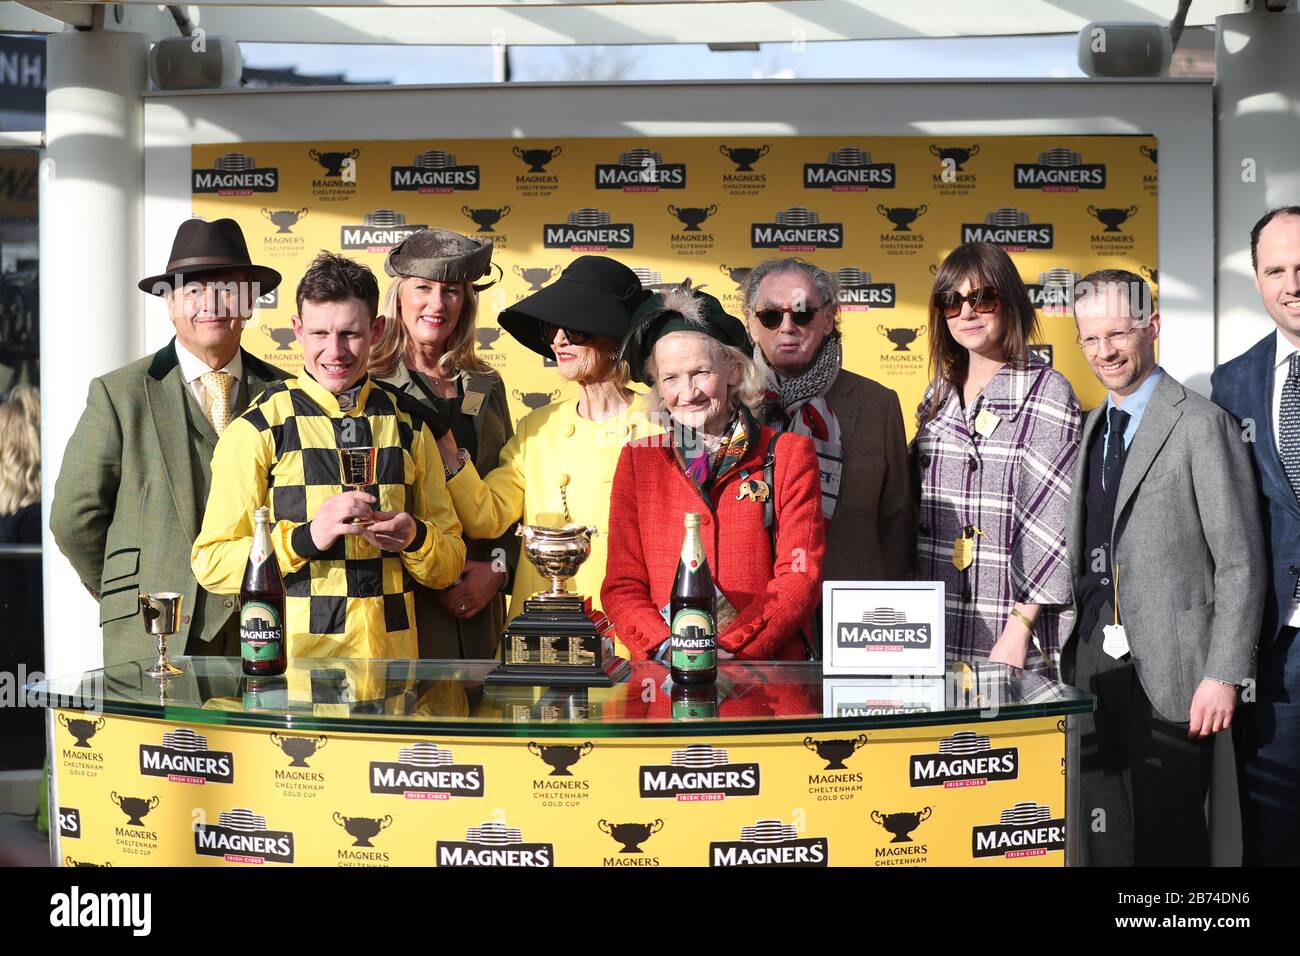 Jockey Paul Townend (2nd left) with the owners after winning the Magners Cheltenham Gold Cup Chase with Al Boum Photo during day four of the Cheltenham Festival at Cheltenham Racecourse. Stock Photo